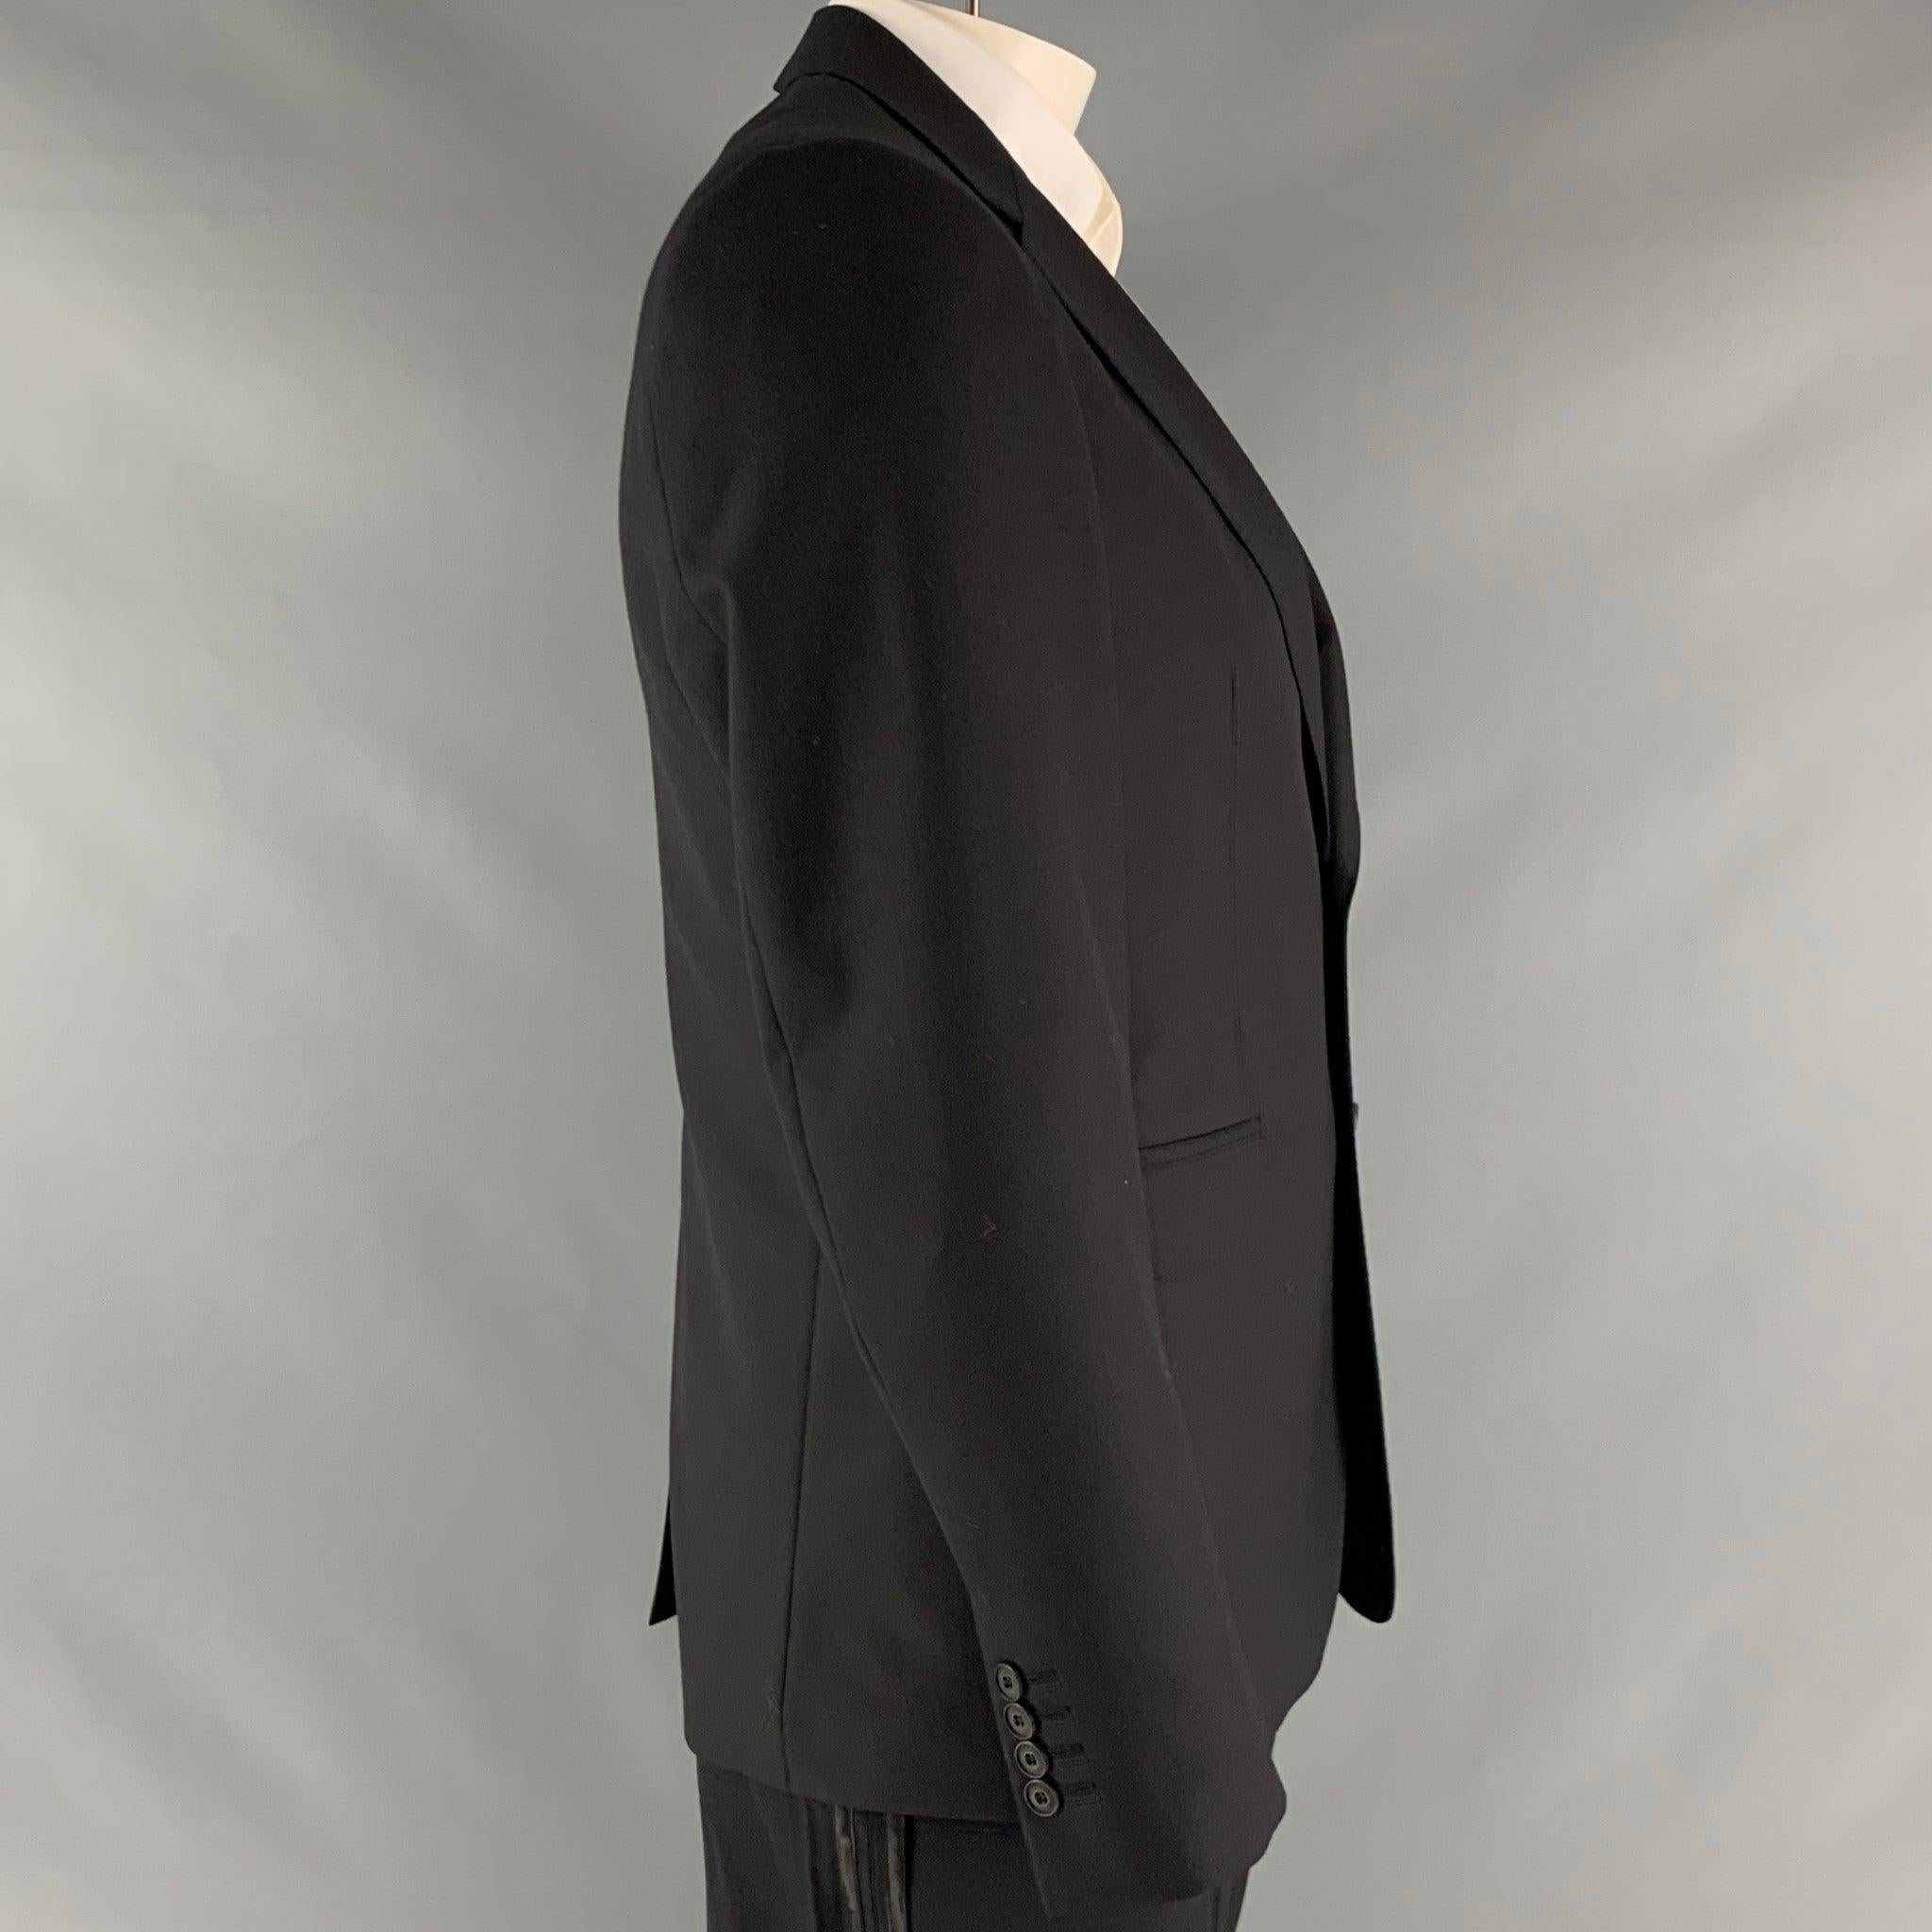 BURBERRY LONDON sport coat comes in a black wool material with a full liner featuring a notch lapel, single back vent, and a double button closure. Made in Italy. New with Tags. 

Marked:   52 

Measurements: 
 
Shoulder: 17.5 inches Chest: 42